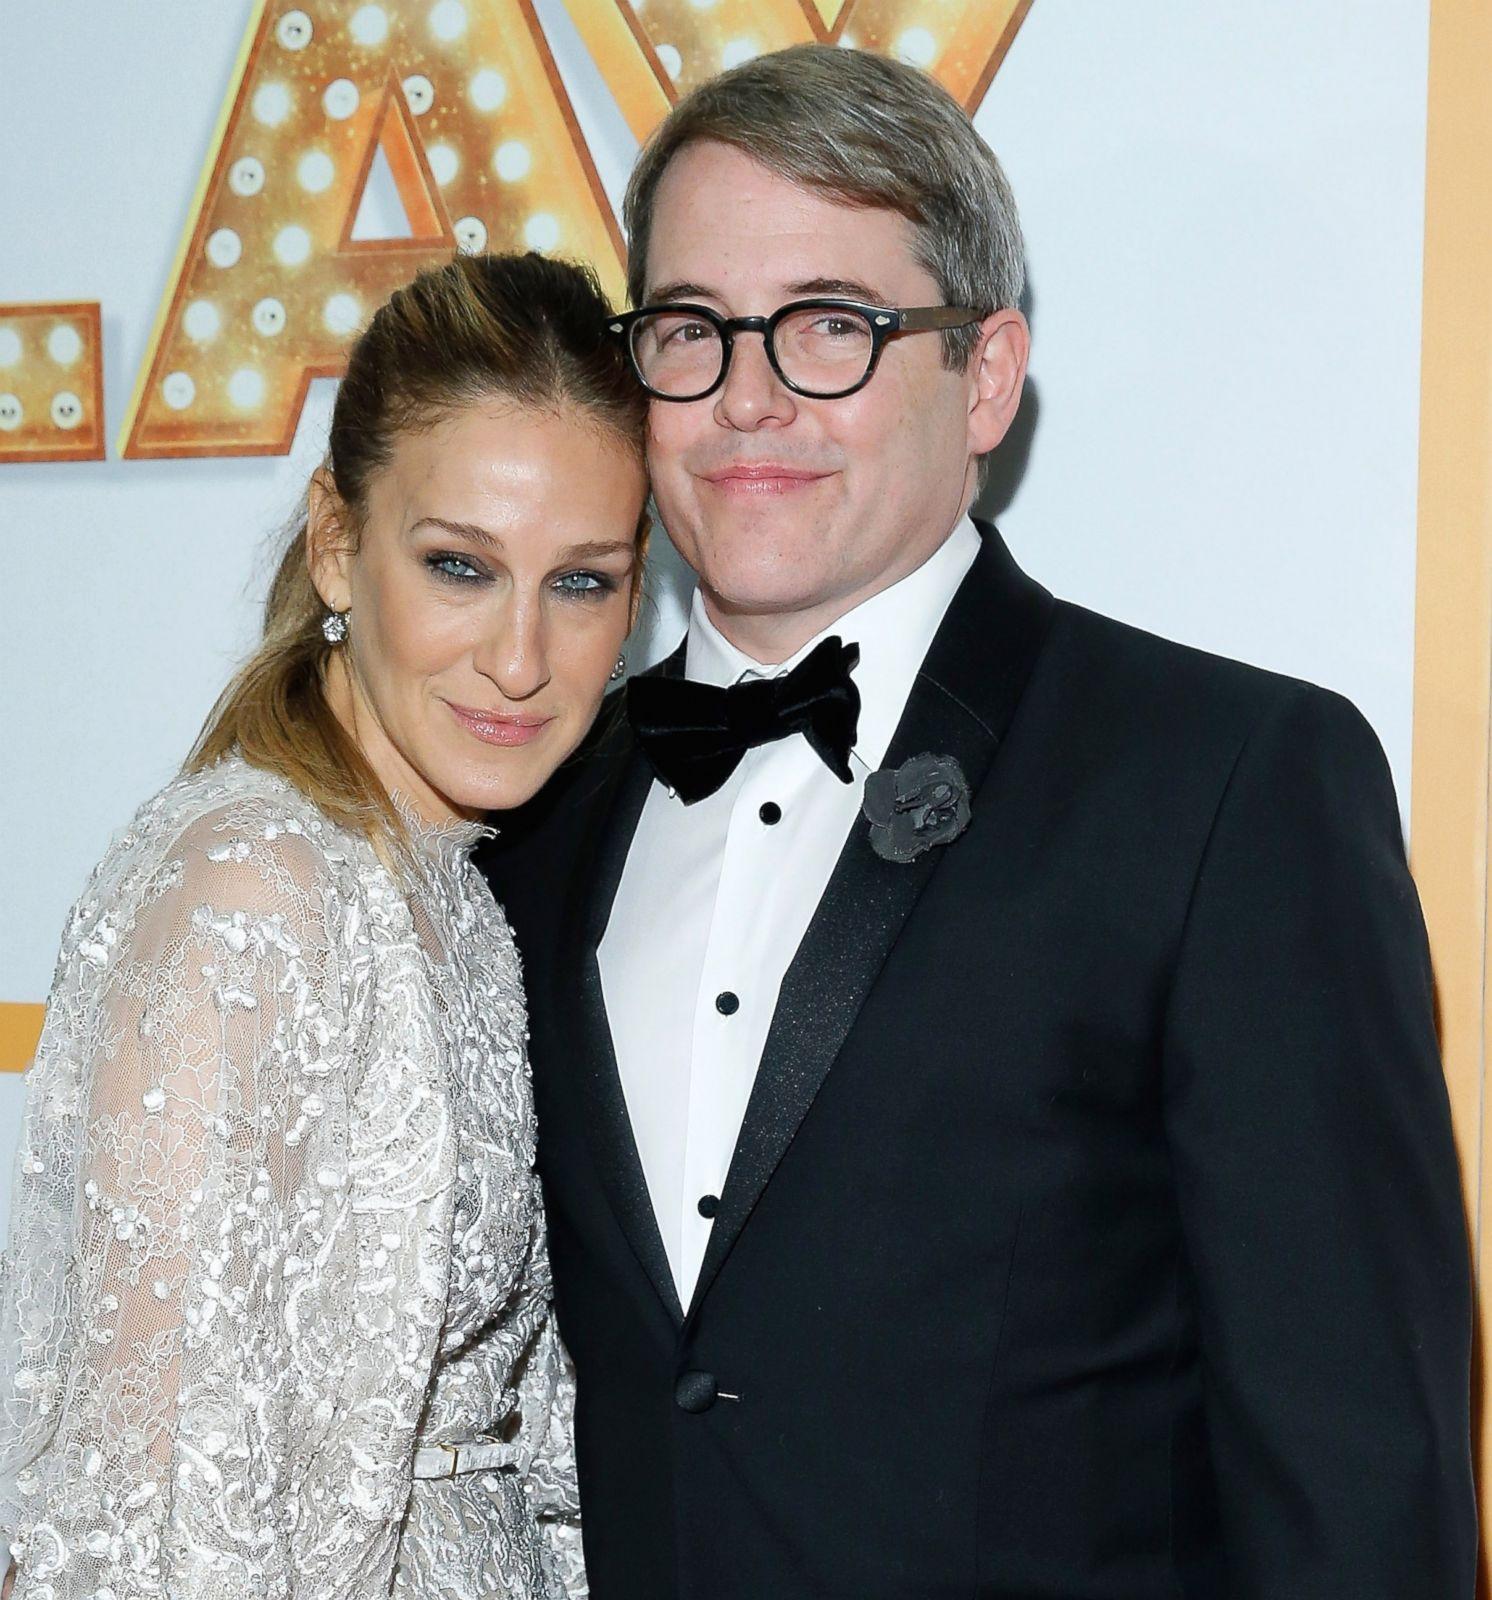 Sarah Jessica Parker and Matthew Broderick Enjoy Date Night Picture